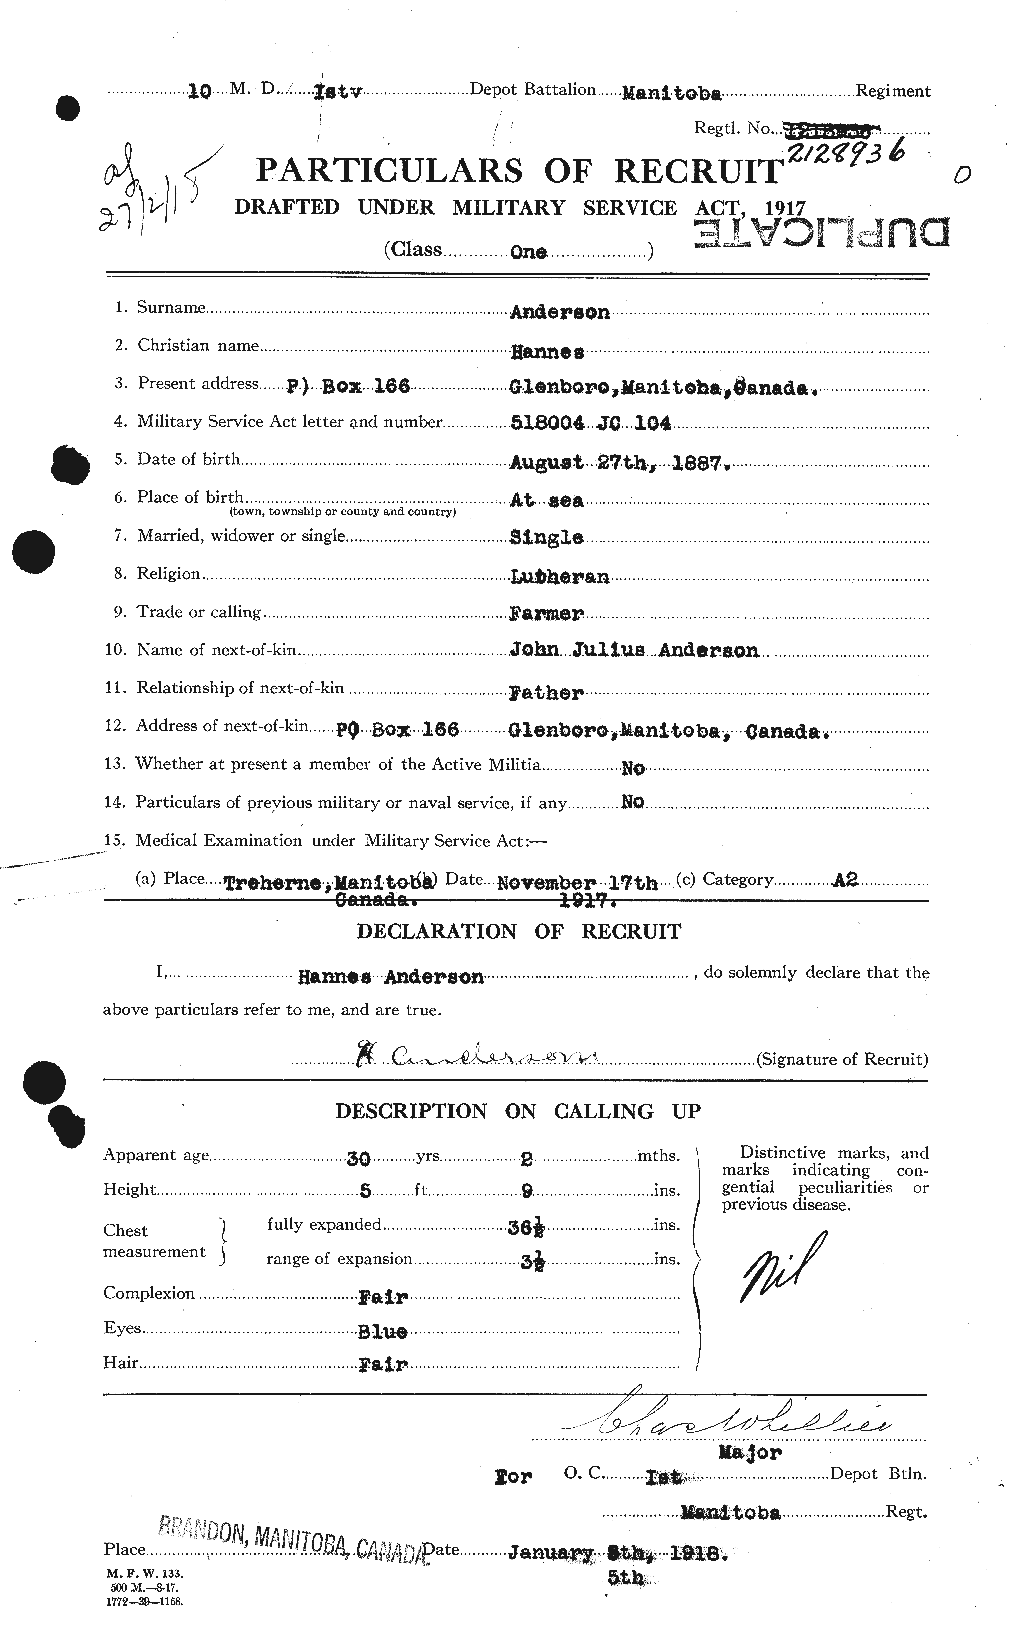 Personnel Records of the First World War - CEF 209636a